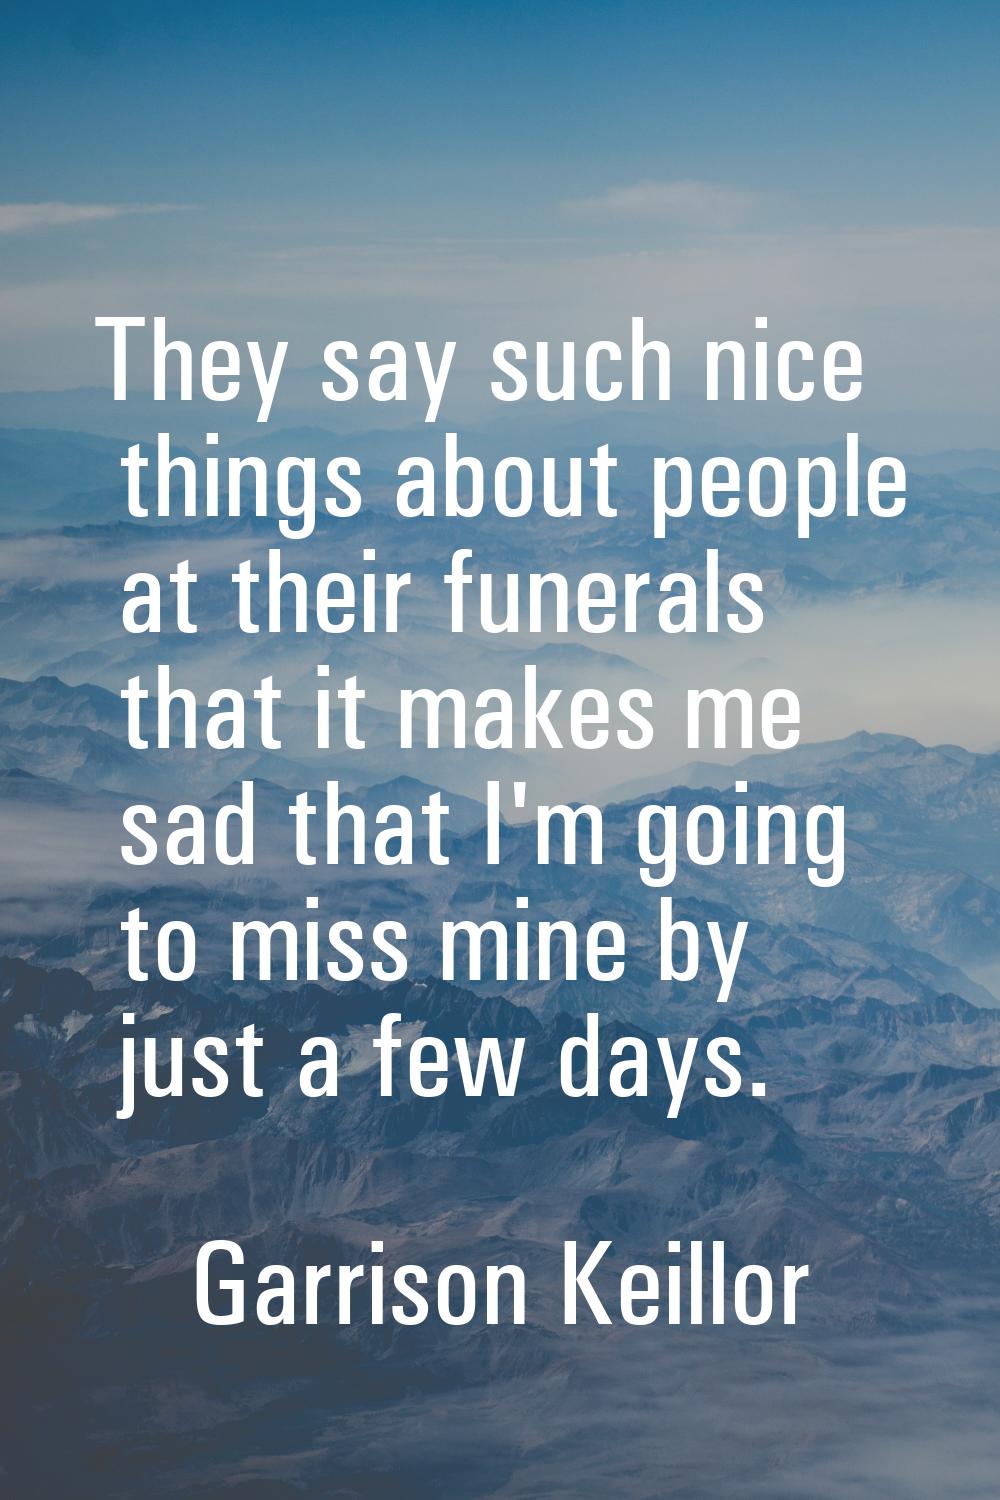 They say such nice things about people at their funerals that it makes me sad that I'm going to mis